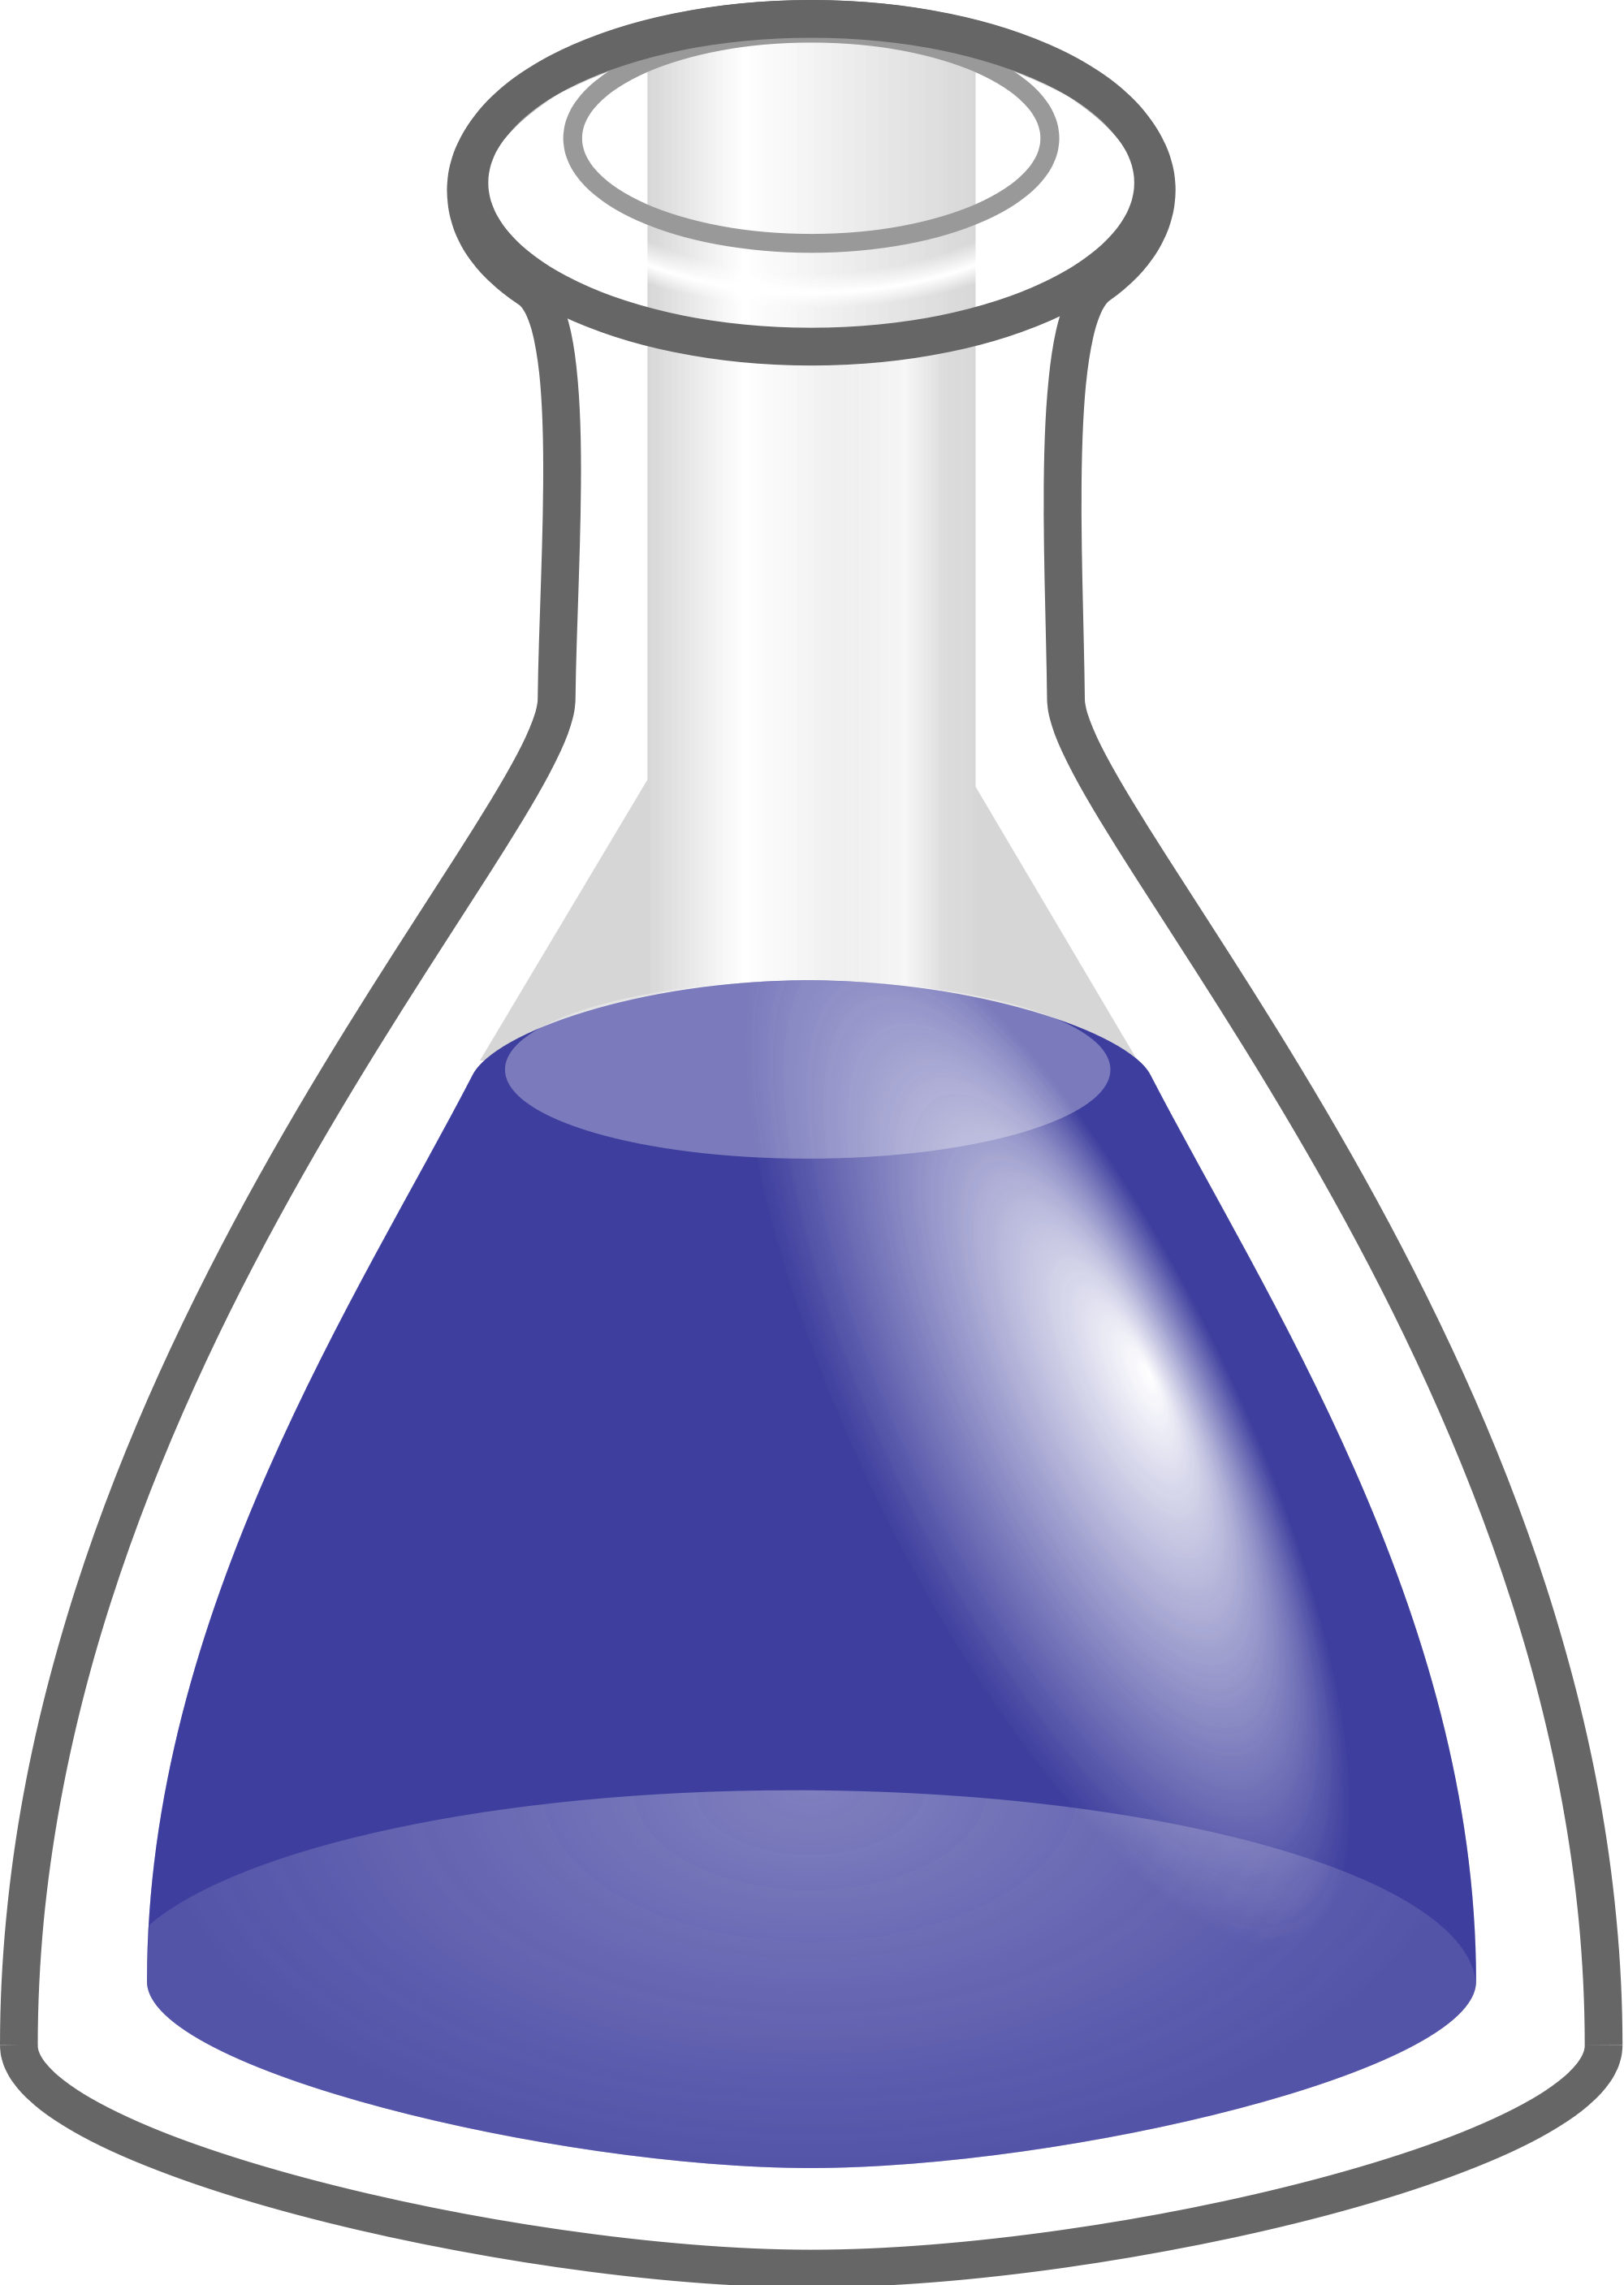 Conical Flask - ClipArt Best.